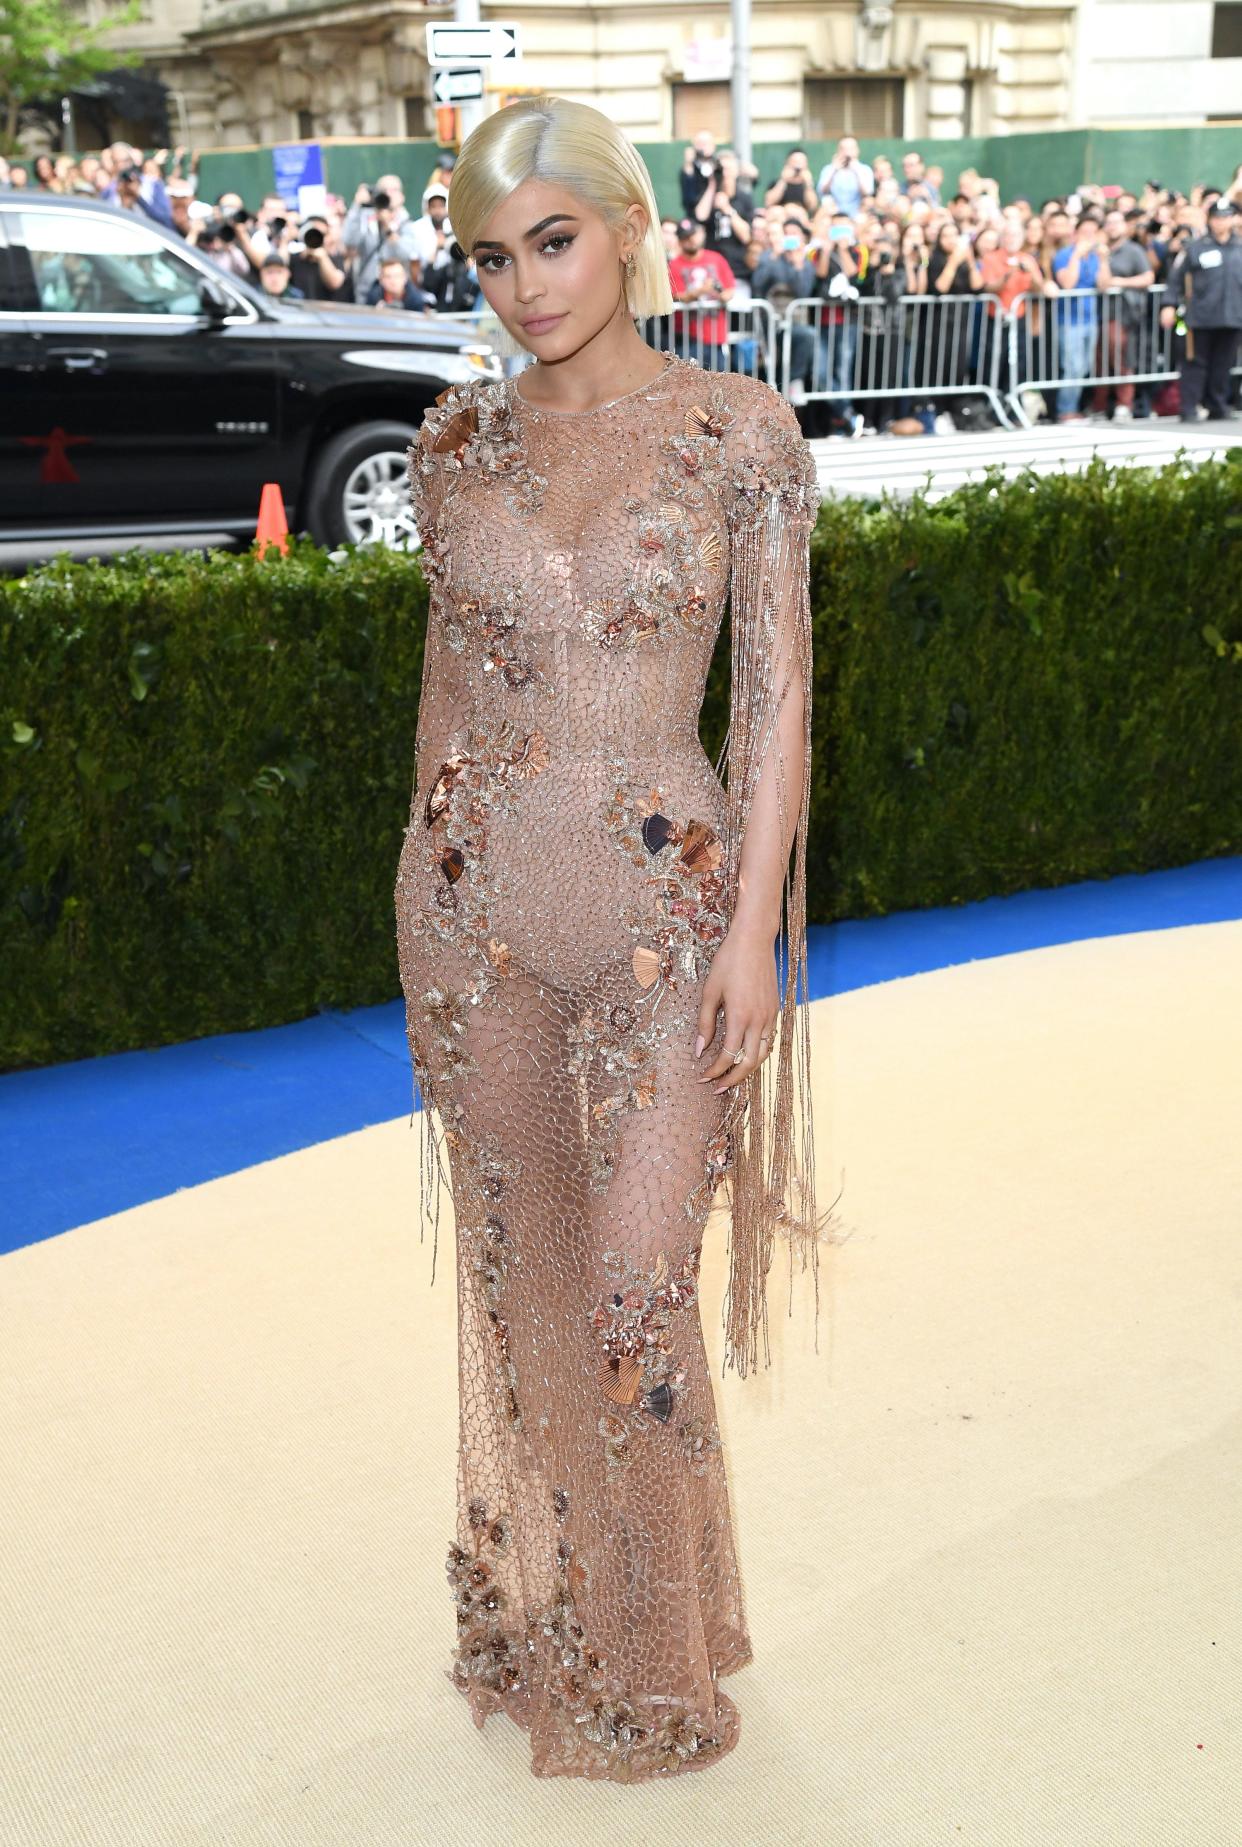 Kylie Jenner poses on the Met Gala carpet wearing a sheer, nude ensemble embellished with crystal and copper accents. Her hair is a blonde bob.